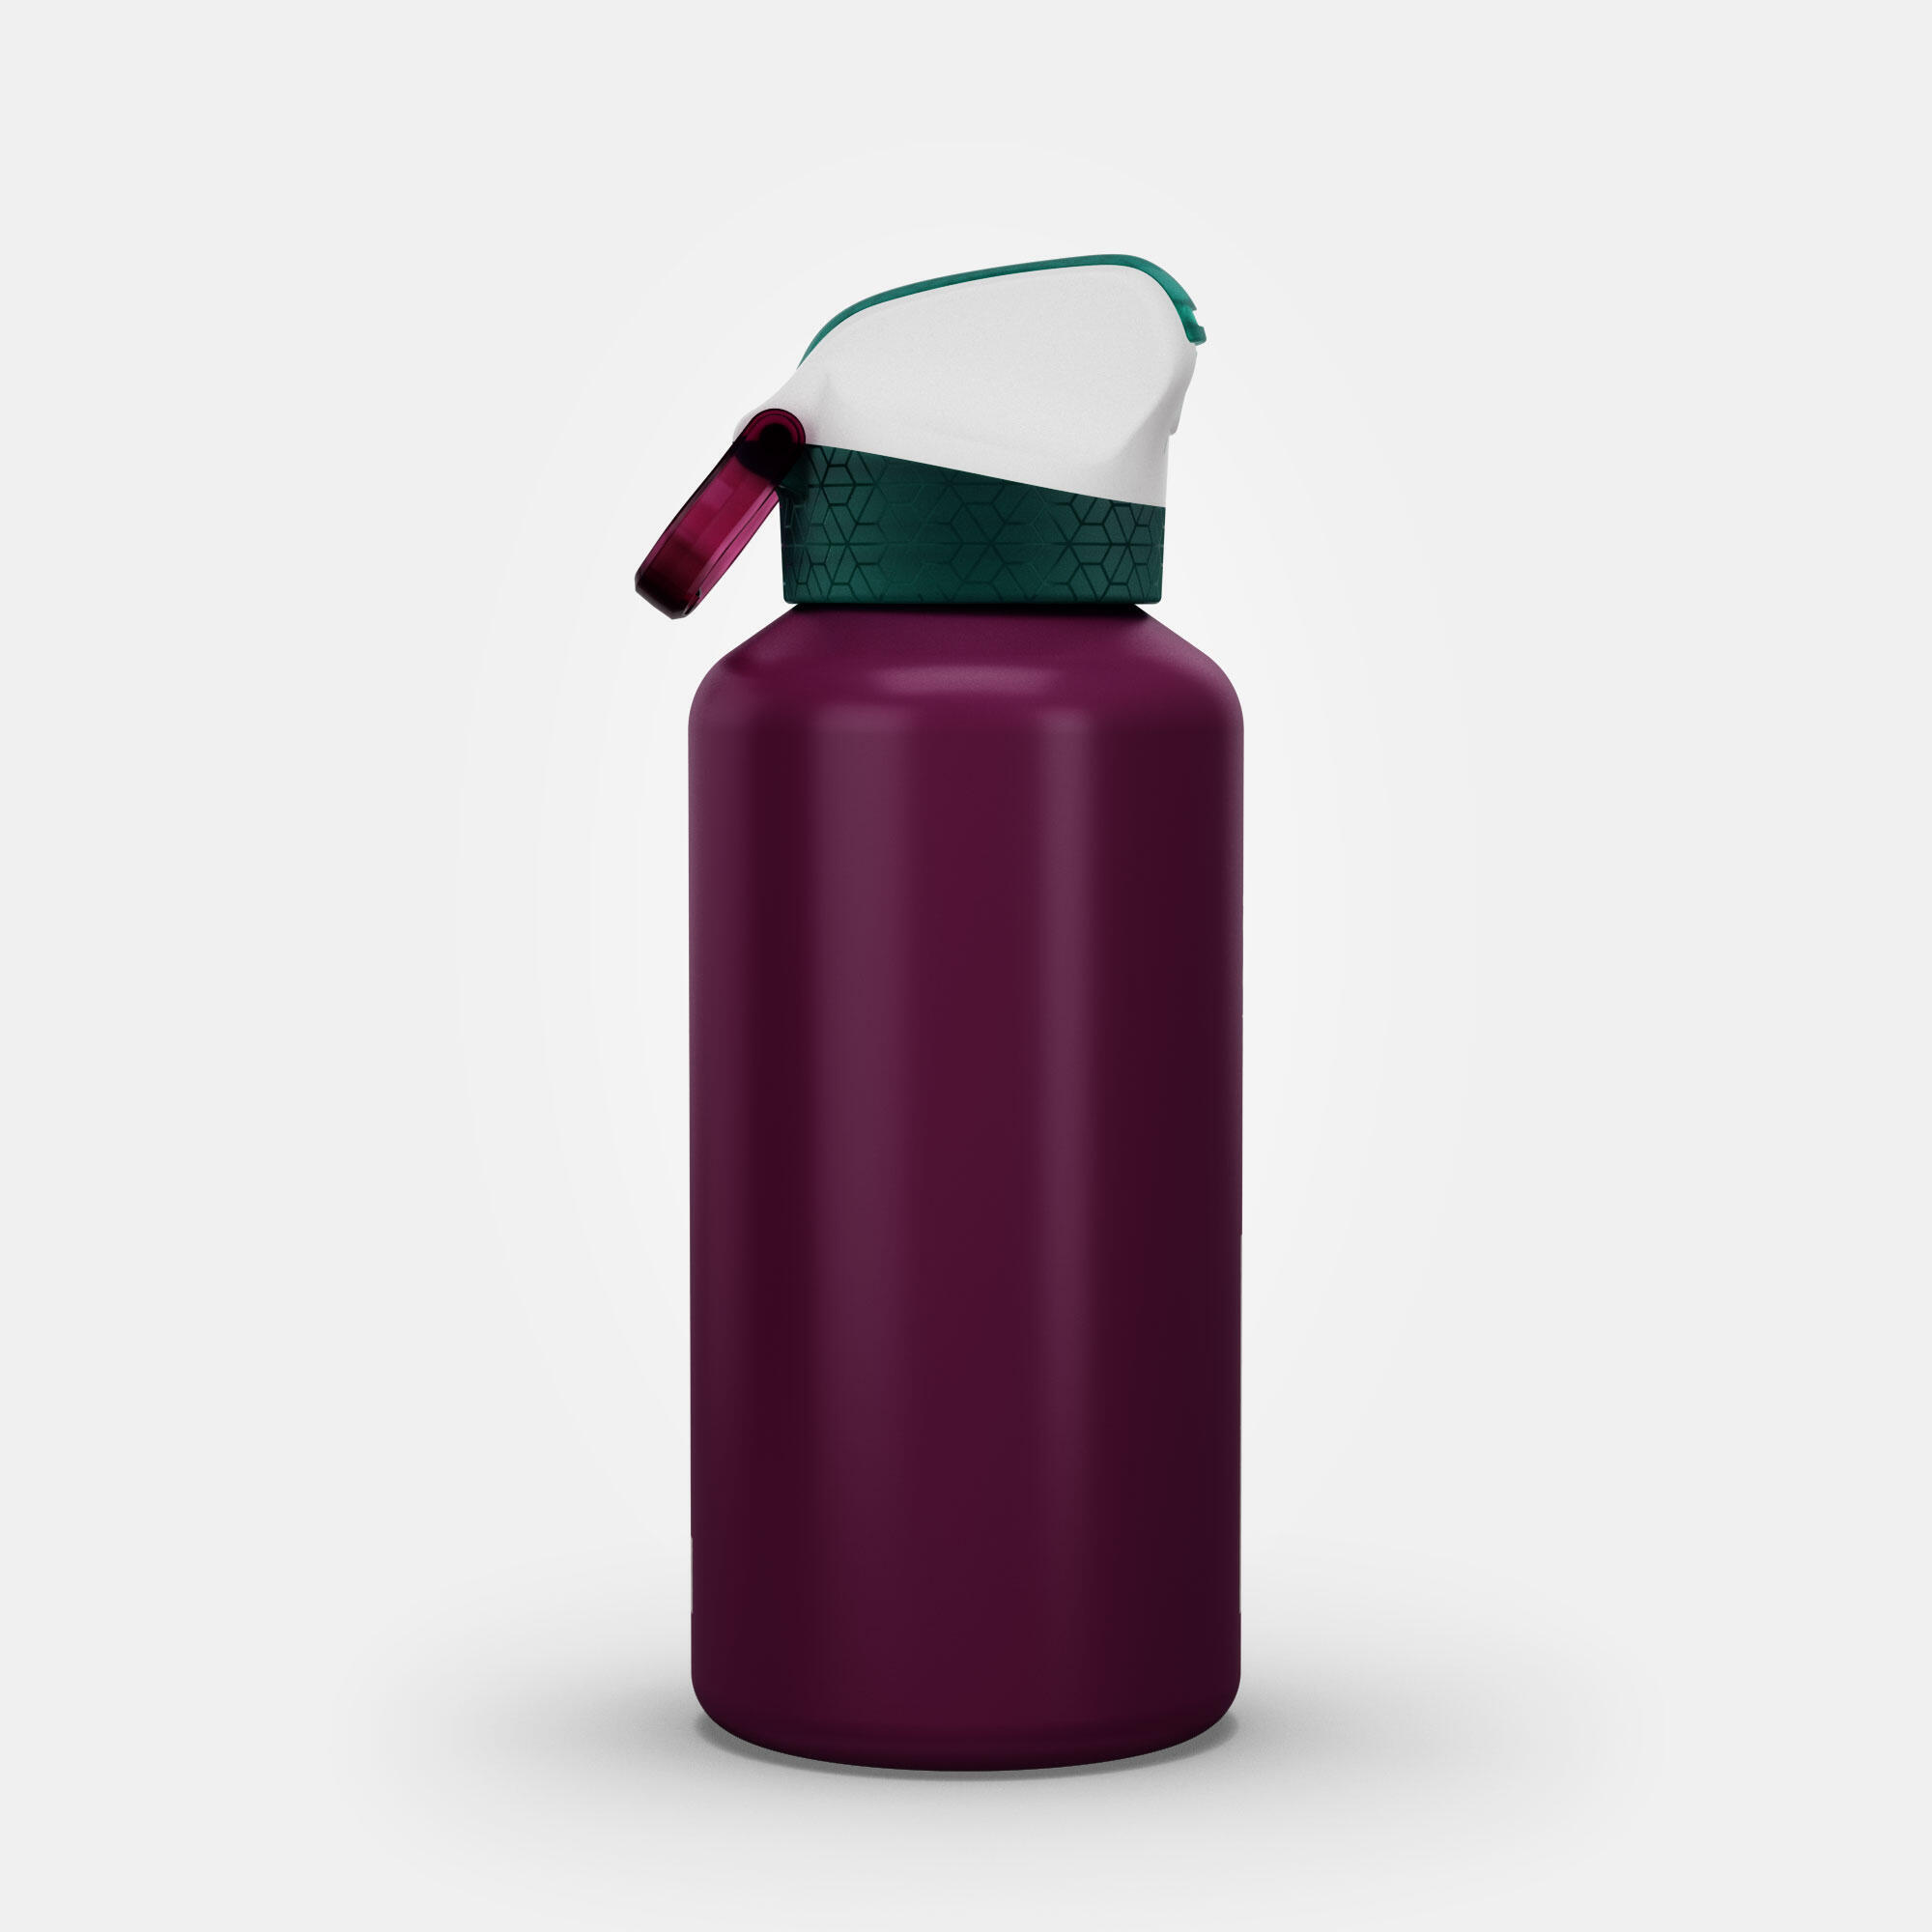 0.6 L aluminium flask with instant cap and pipette for hiking 12/12